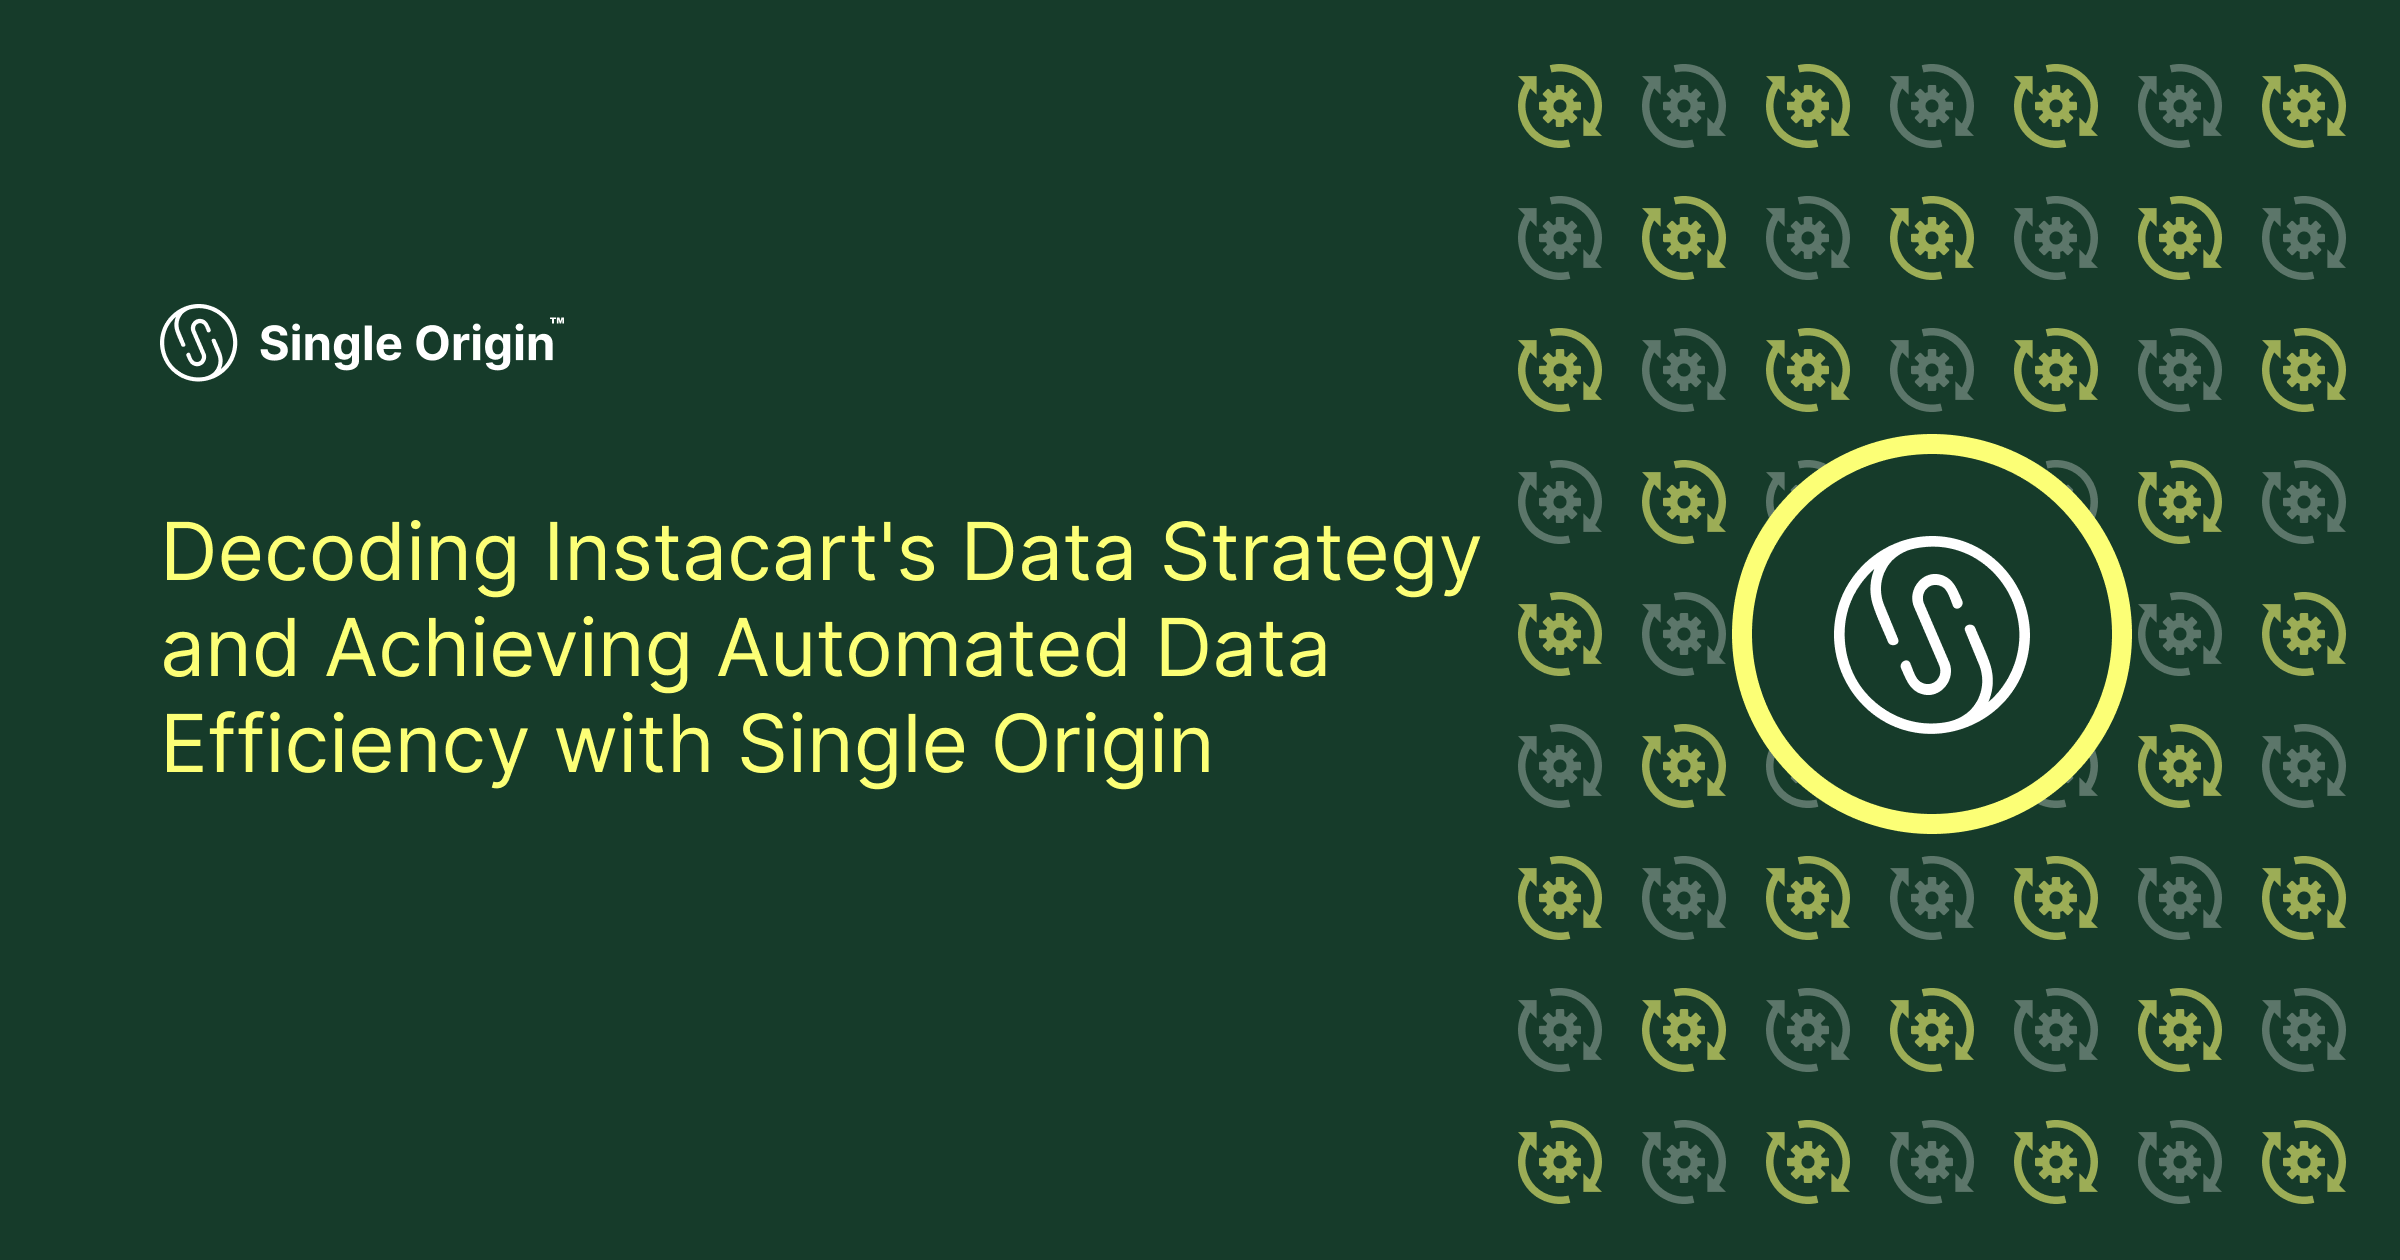 Decoding Instacart's Data Strategy and Achieving Automated Data Efficiency with Single Origin